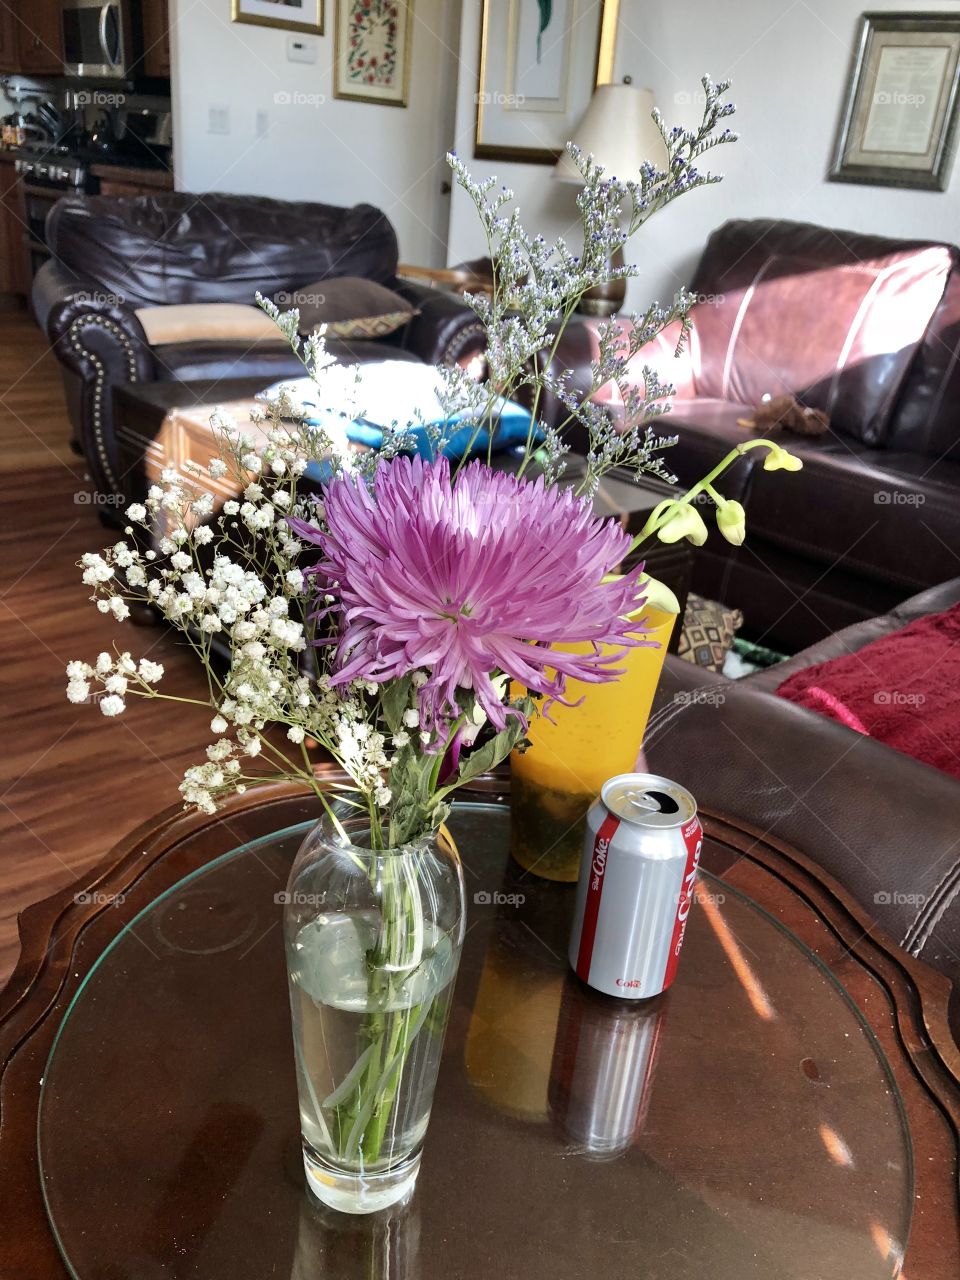 Flowers bouquet in living room.